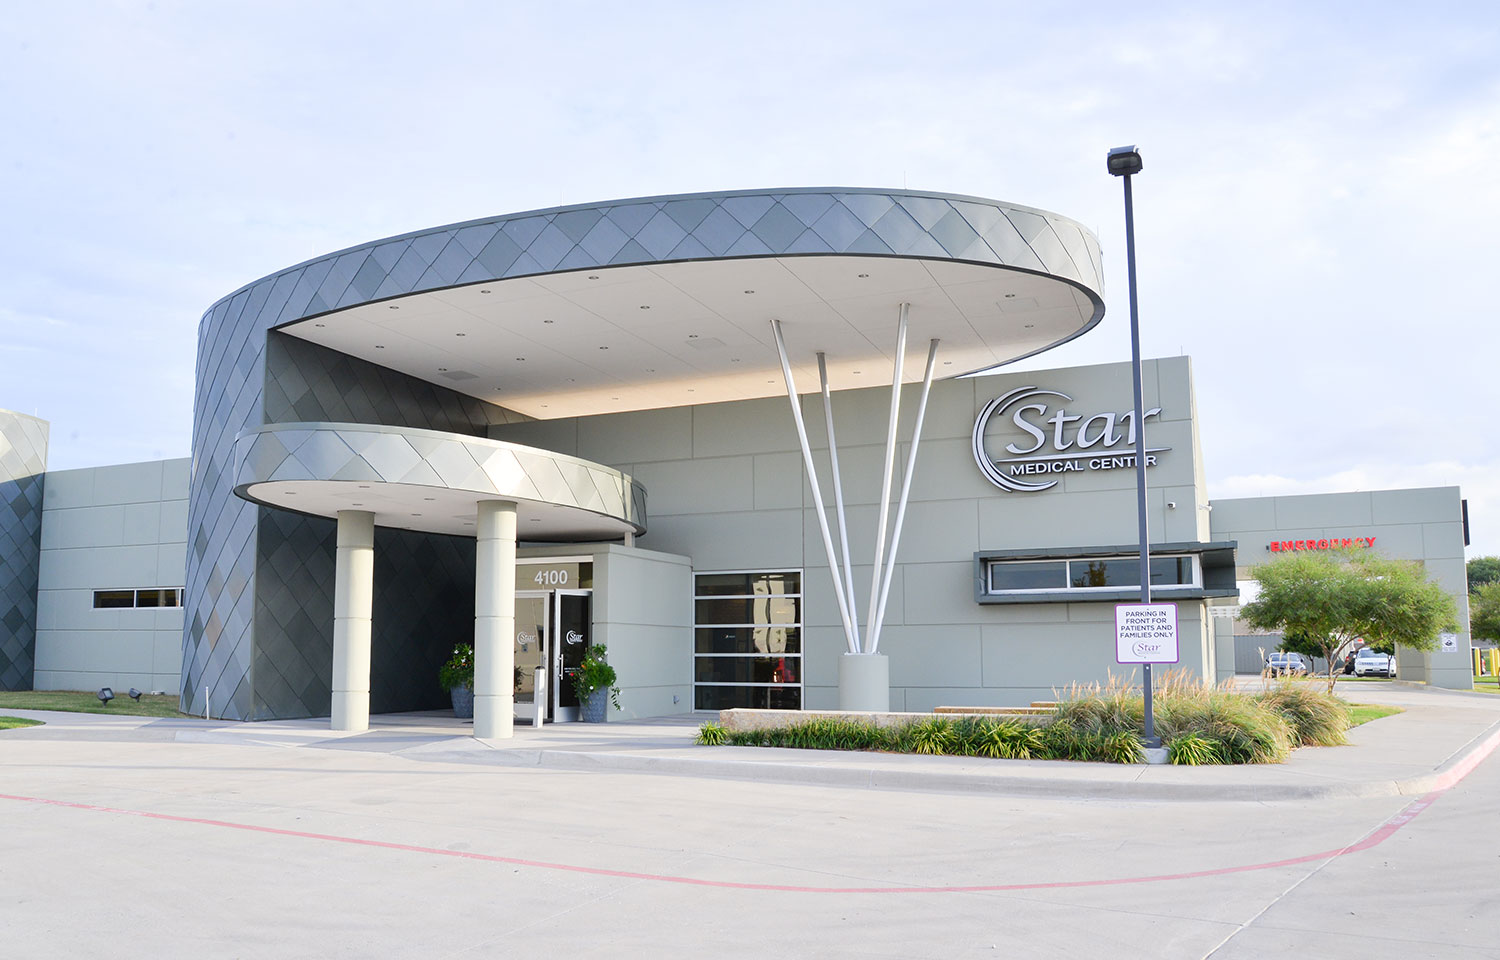 Star Medical Center offers a variety of individualized care ranging from ER services to plastic surgery.